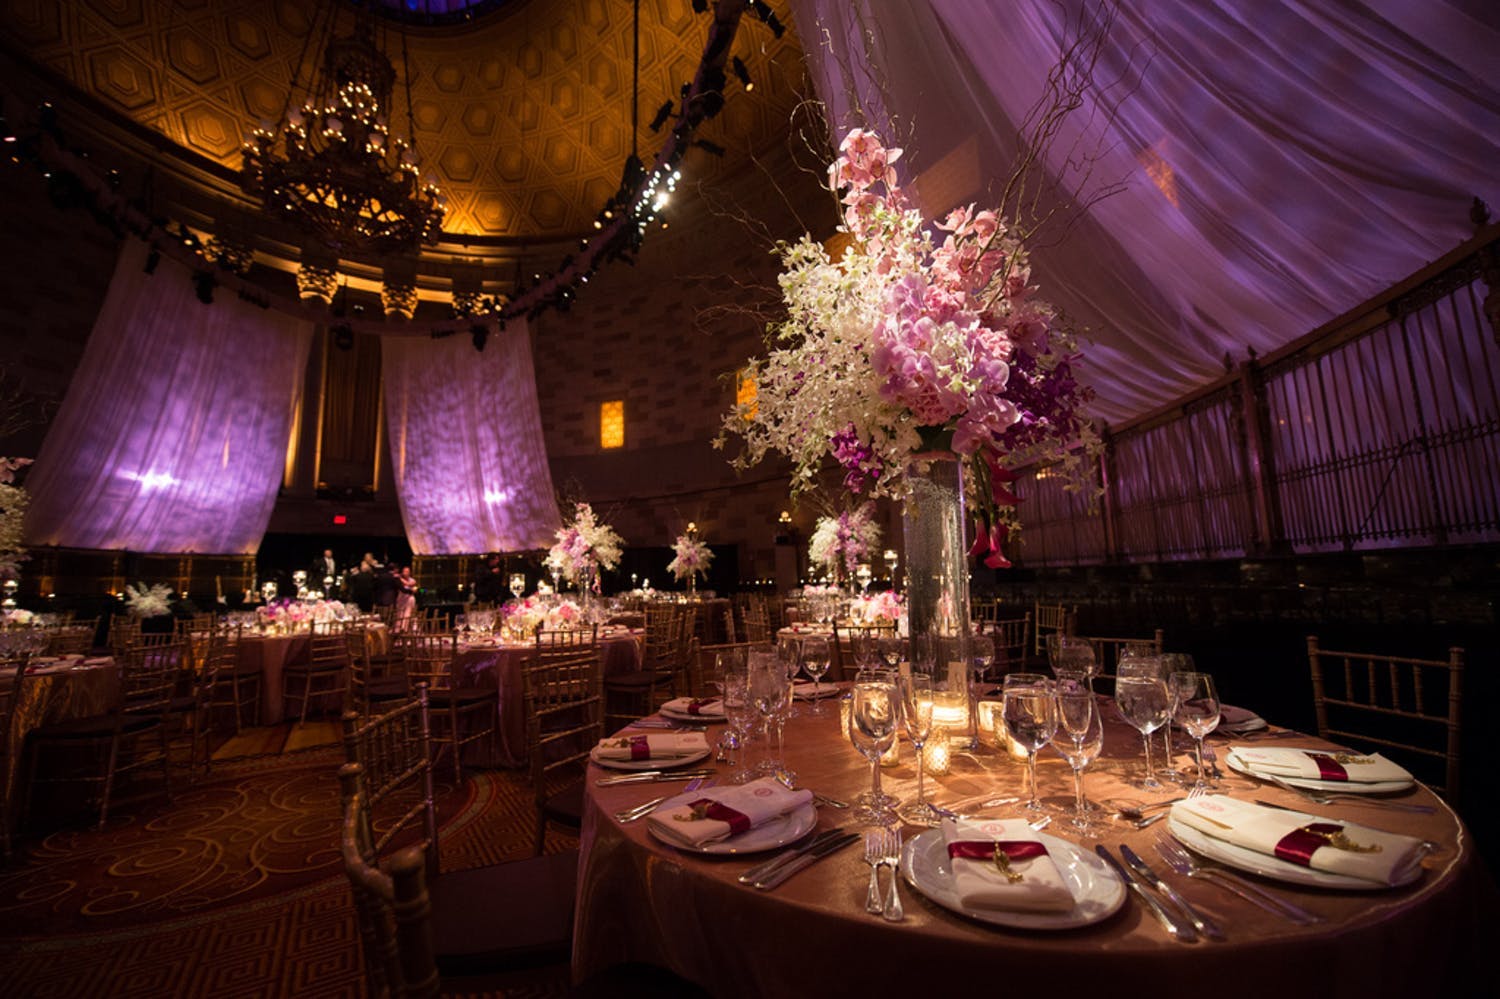 Wedding Ballroom With Illuminated Purple Drapery Billowing From Ceiling | PartySlate